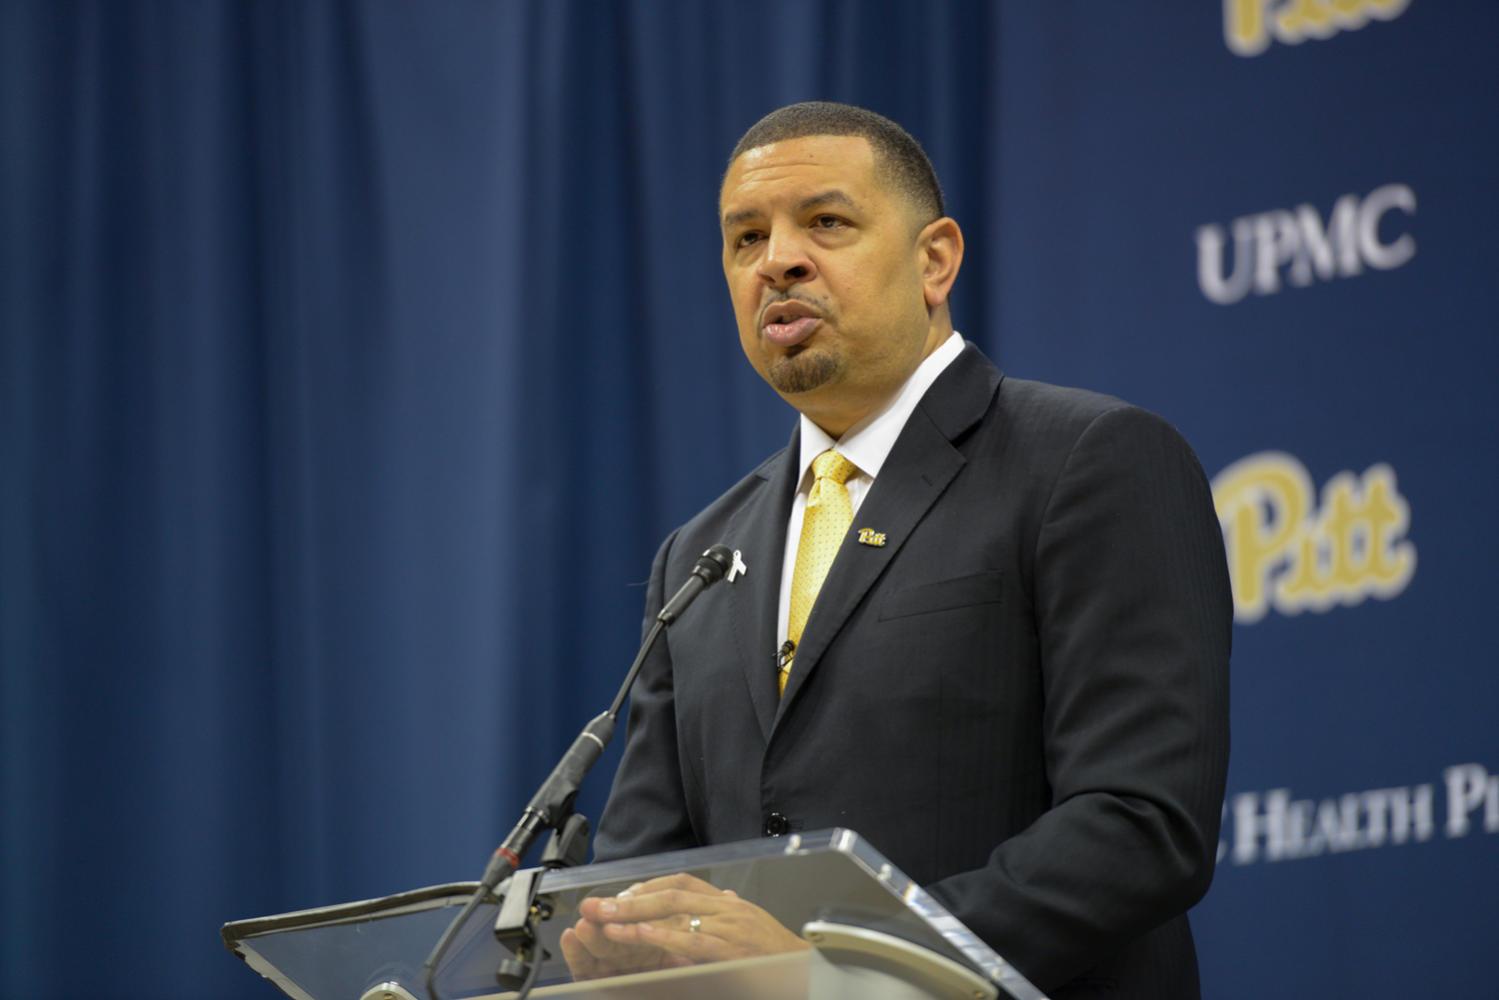 Capel rounds out assistant coaching staff - The Pitt News6 日前